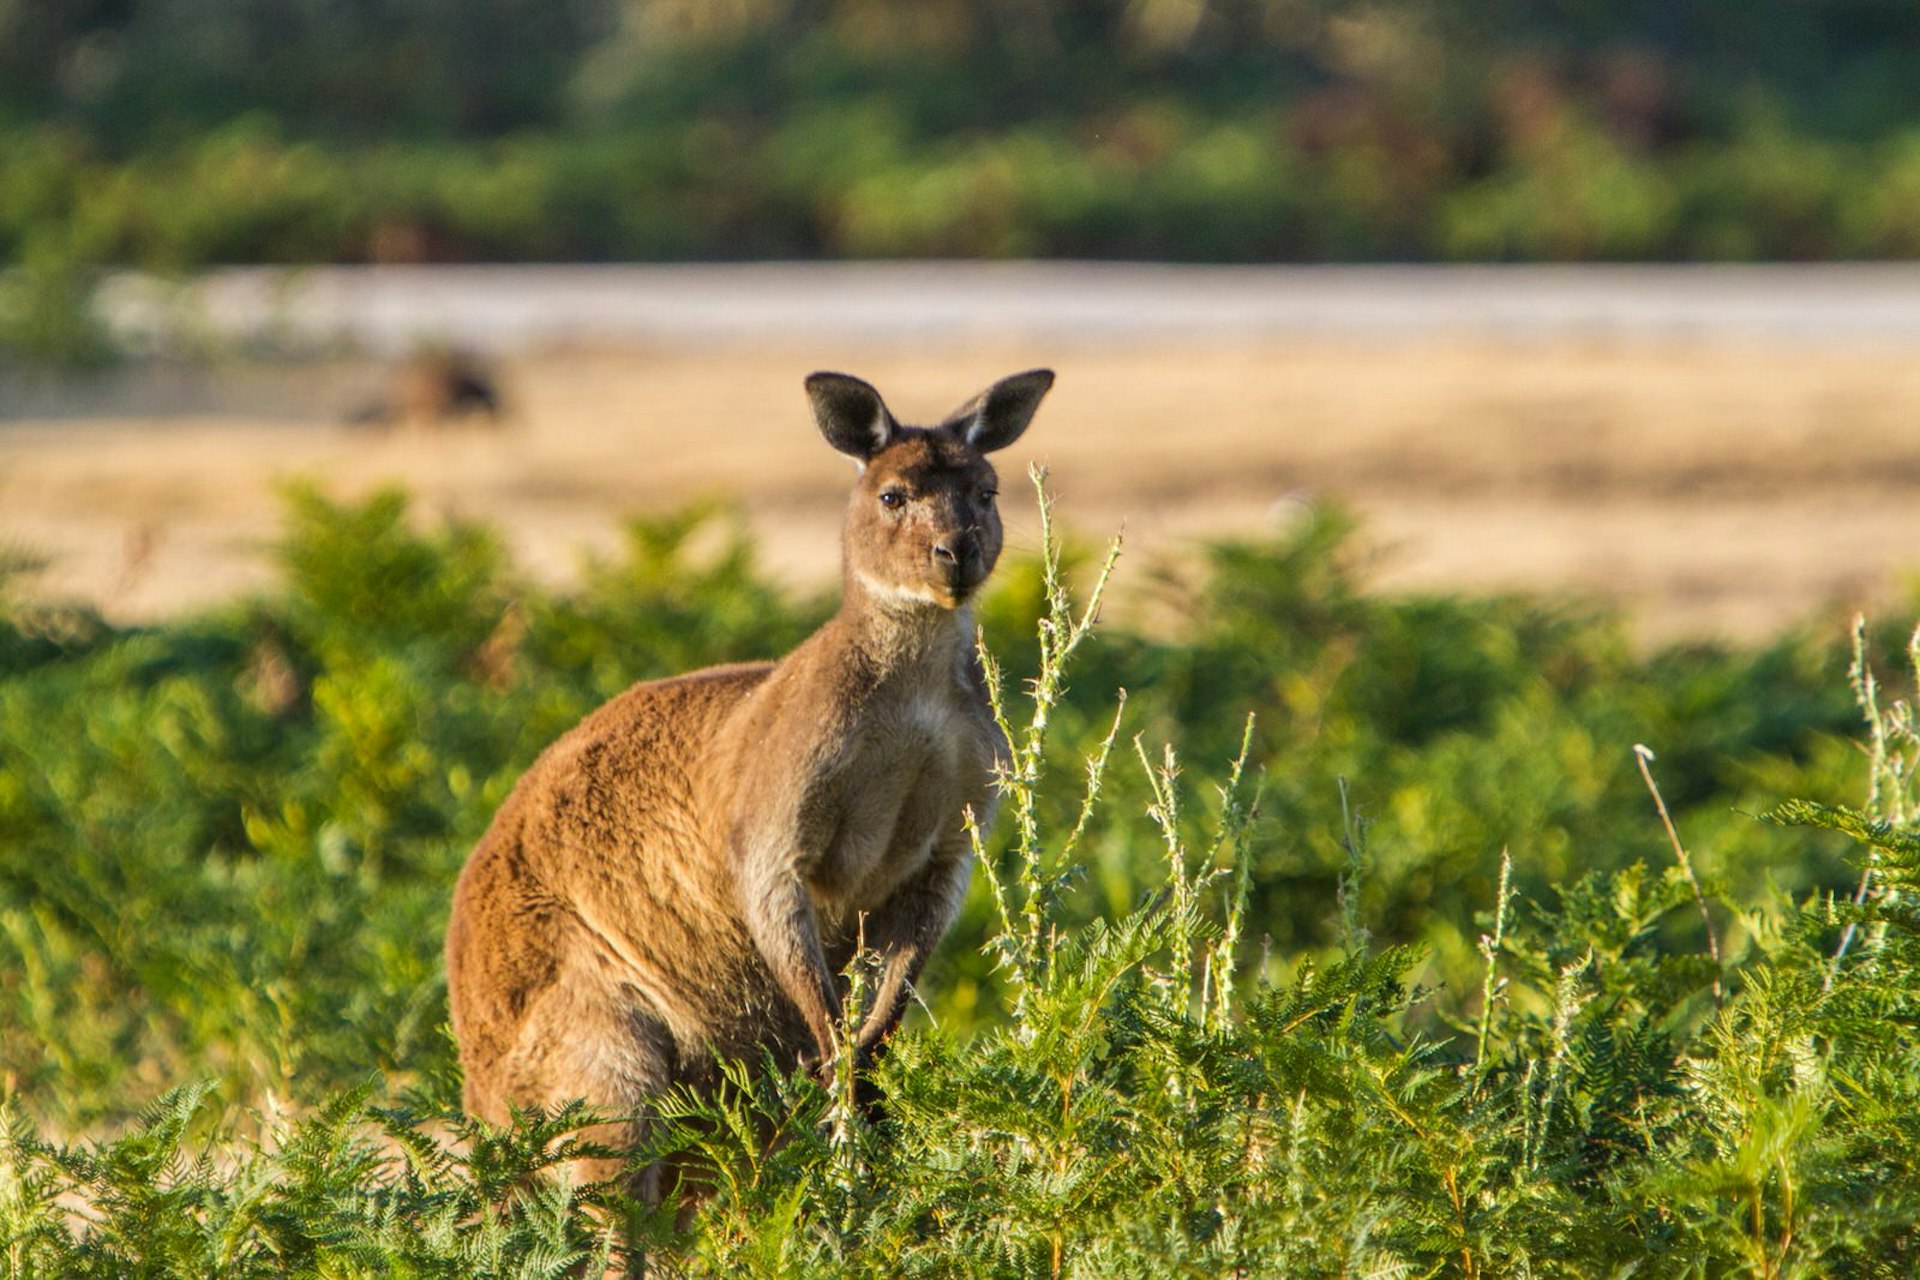 Get up close and personal with the locals on Kangaroo Island © Kangaroo Island Wilderness Trail